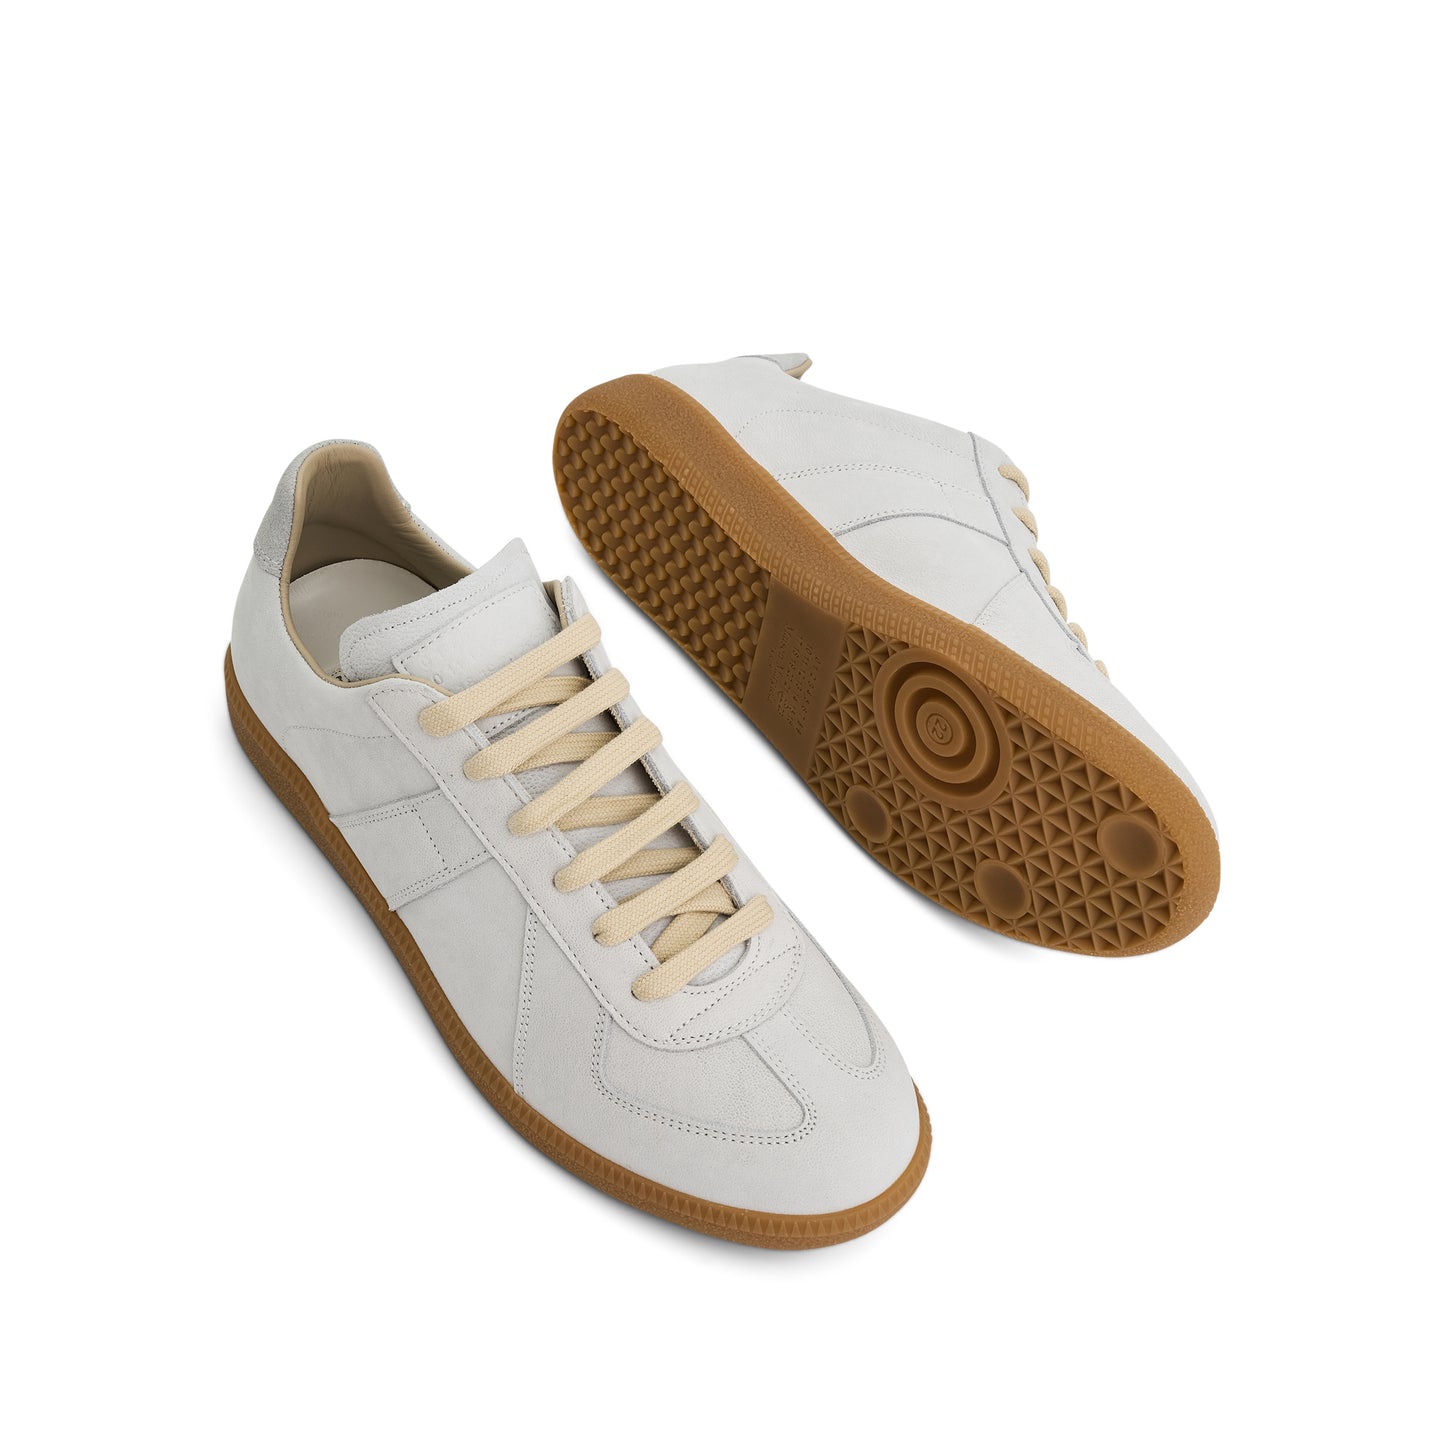 Replica Leather Sneakers in Light Grey